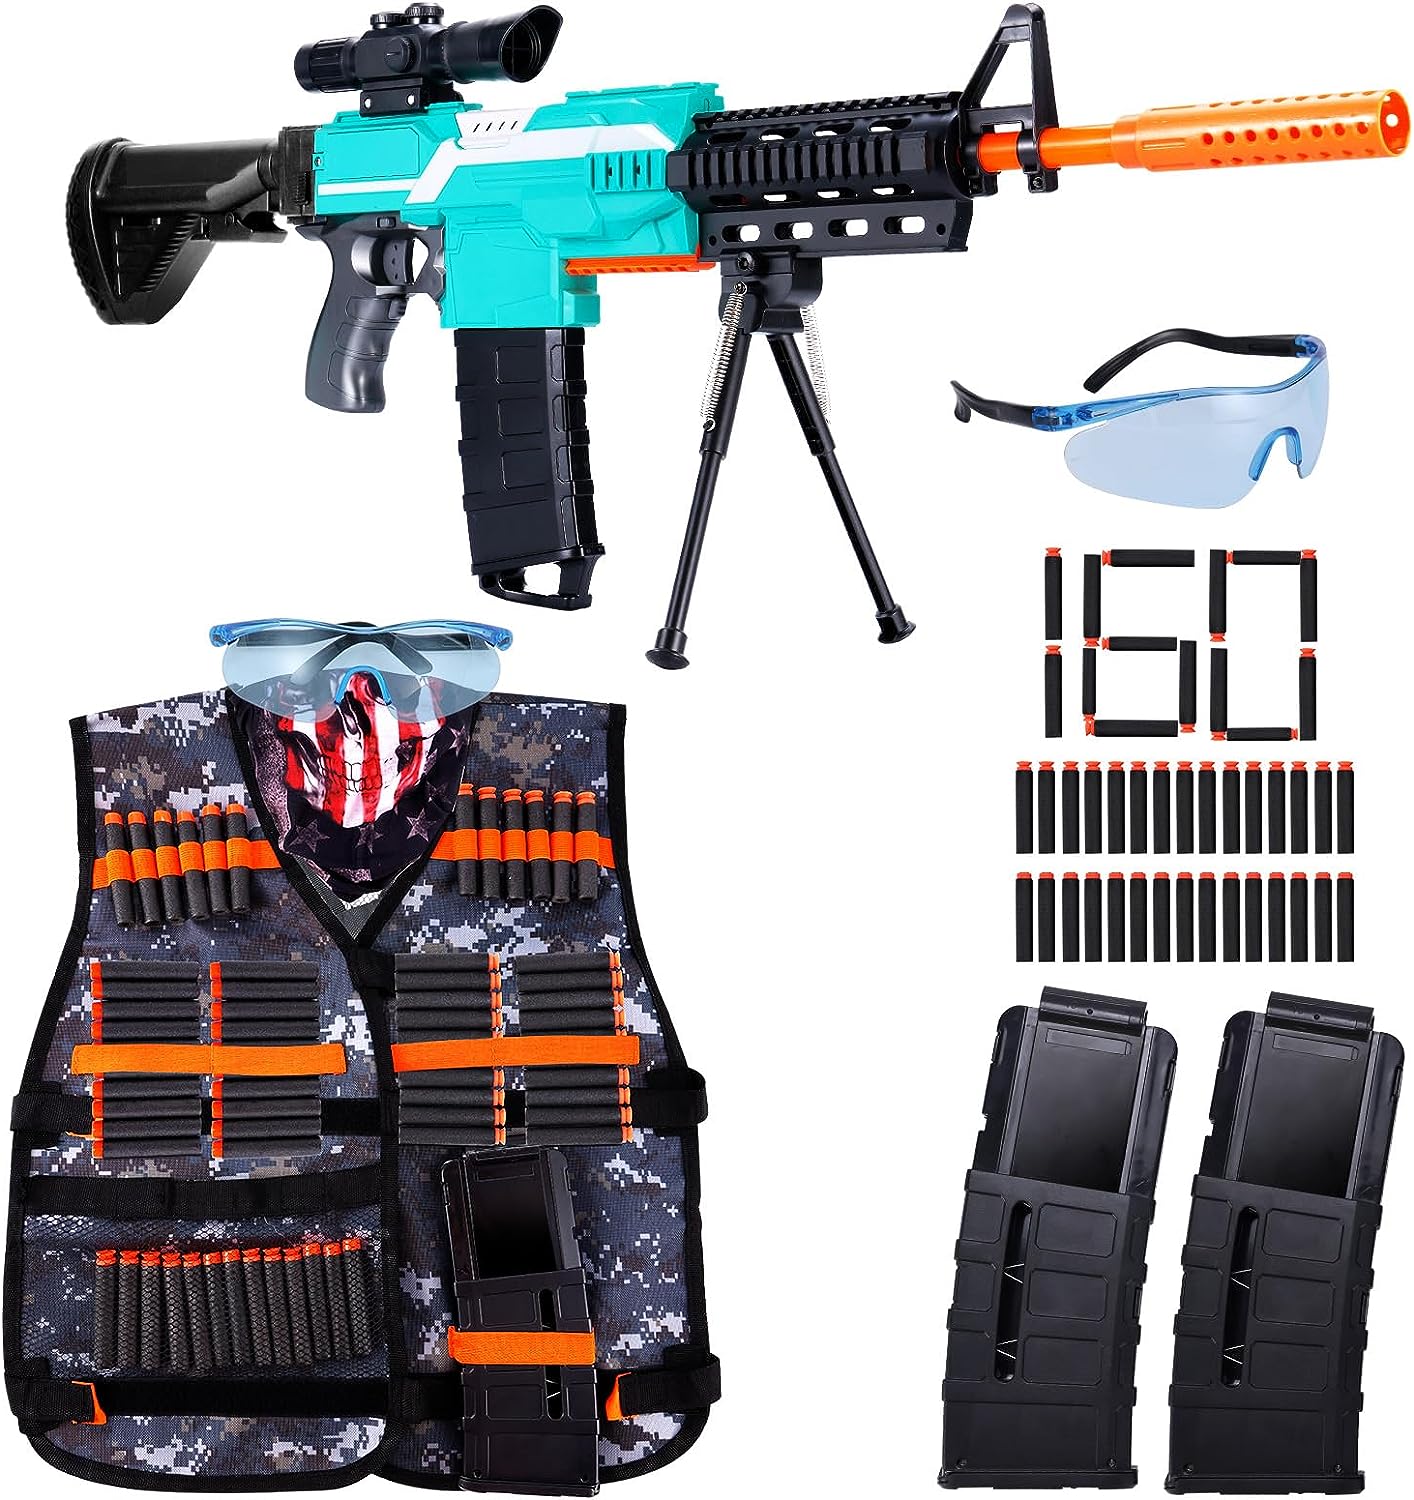  AURIDA Toy Sniper Rifle for Nerf Guns Automatic Machine Gun,  100+ Styles Toy Foam Blasters & Guns, Toy Gun for Kids Ages 8-12, Gift for  Birthday, Christmas - with Bracket 